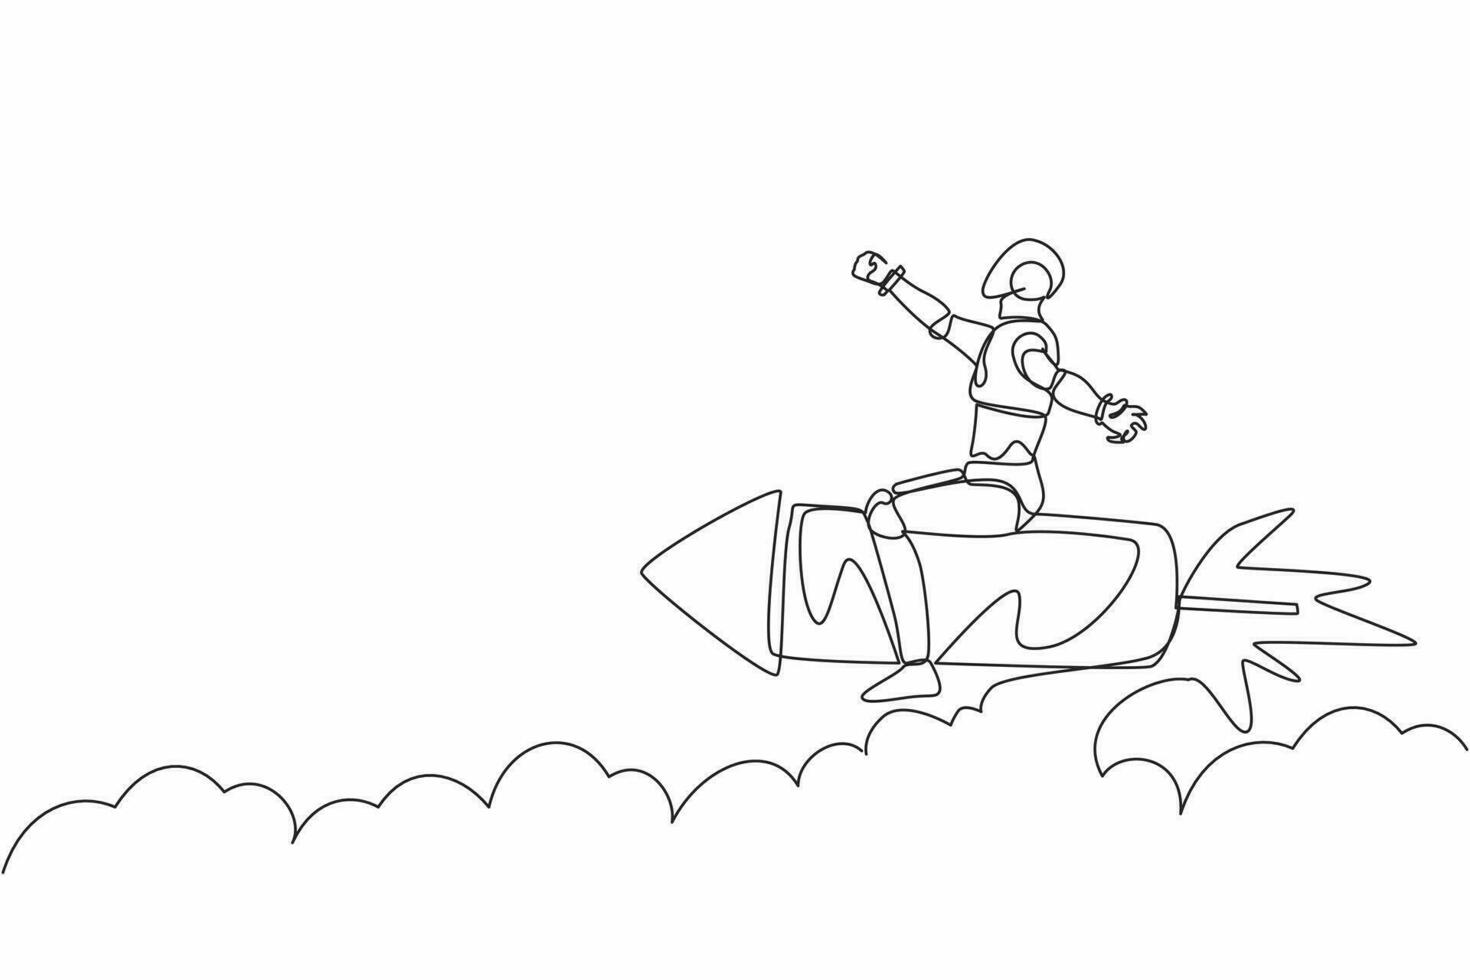 Single one line drawing robot flying high riding firework rocket. Future technology development. Artificial intelligence machine learning processes. Continuous line design graphic vector illustration